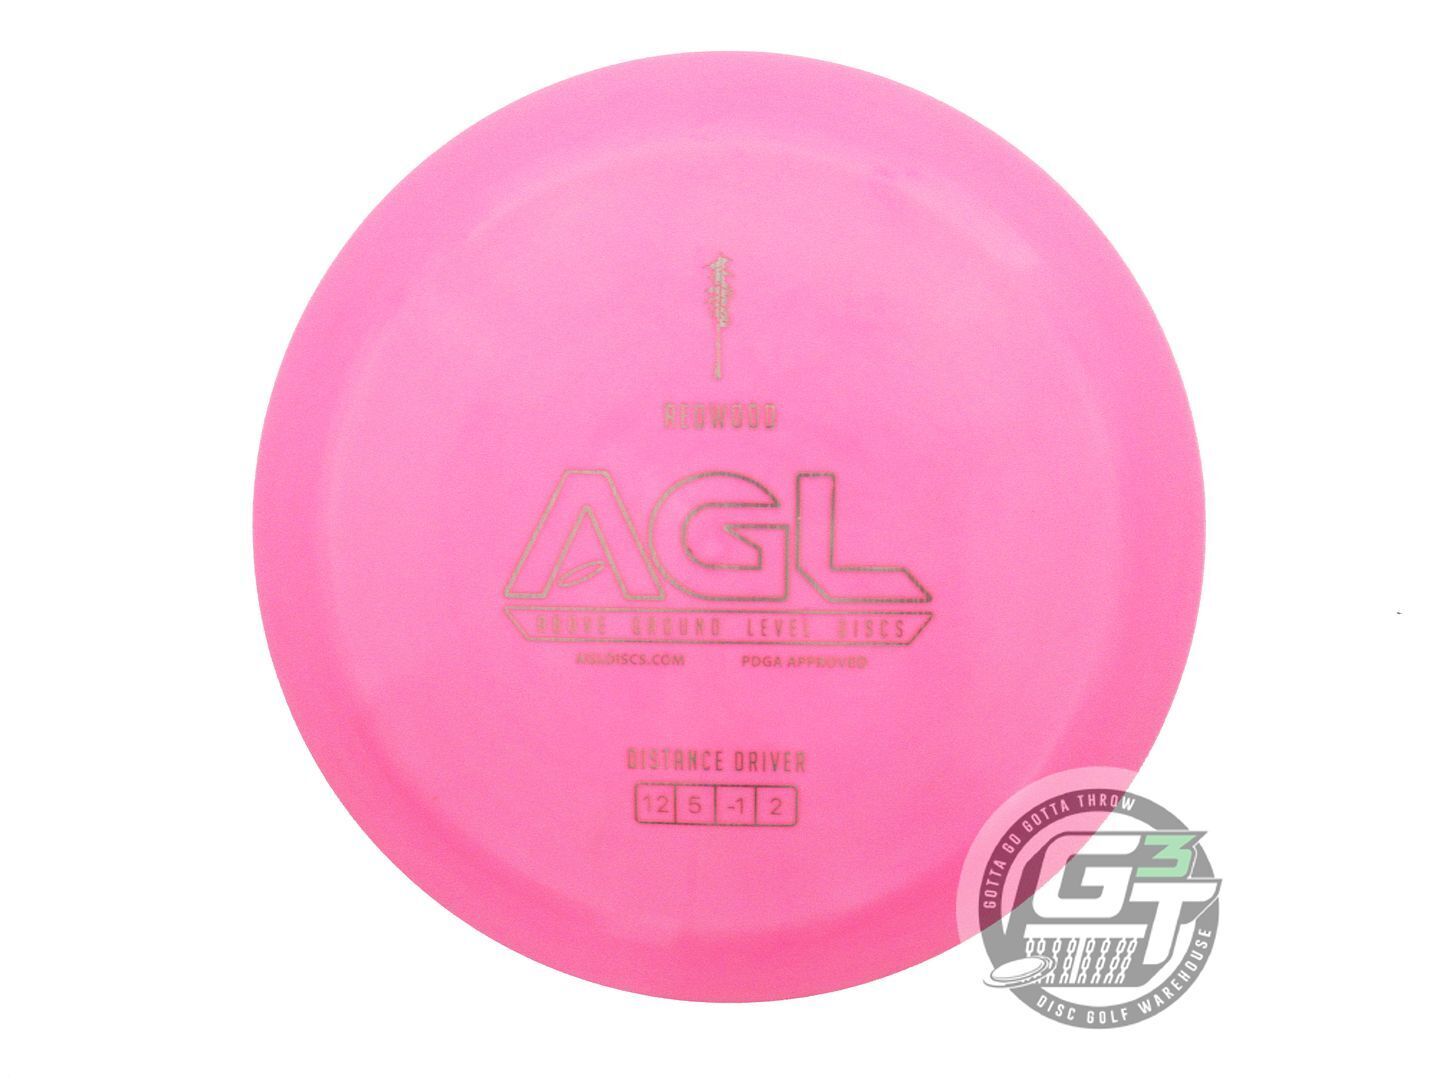 Above Ground Level Alpine Redwood Distance Driver Golf Disc (Individually Listed)